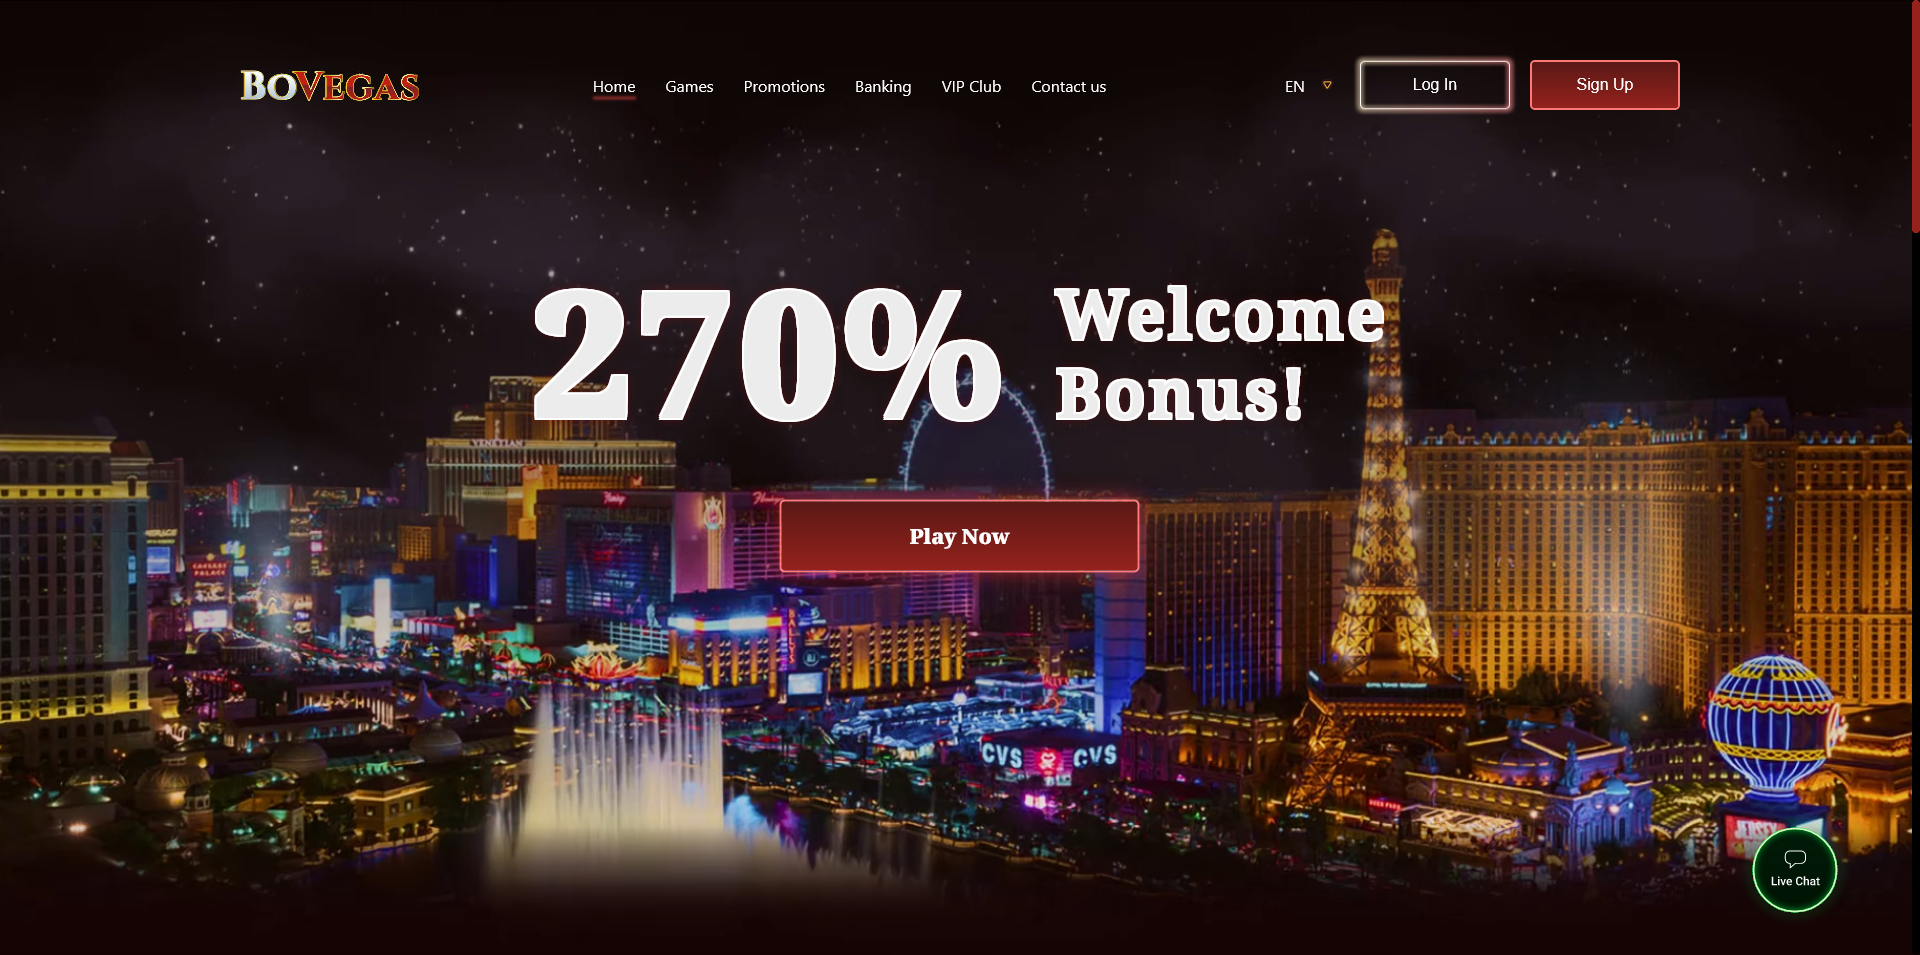 Screenshot of the BoVegas Casino home page